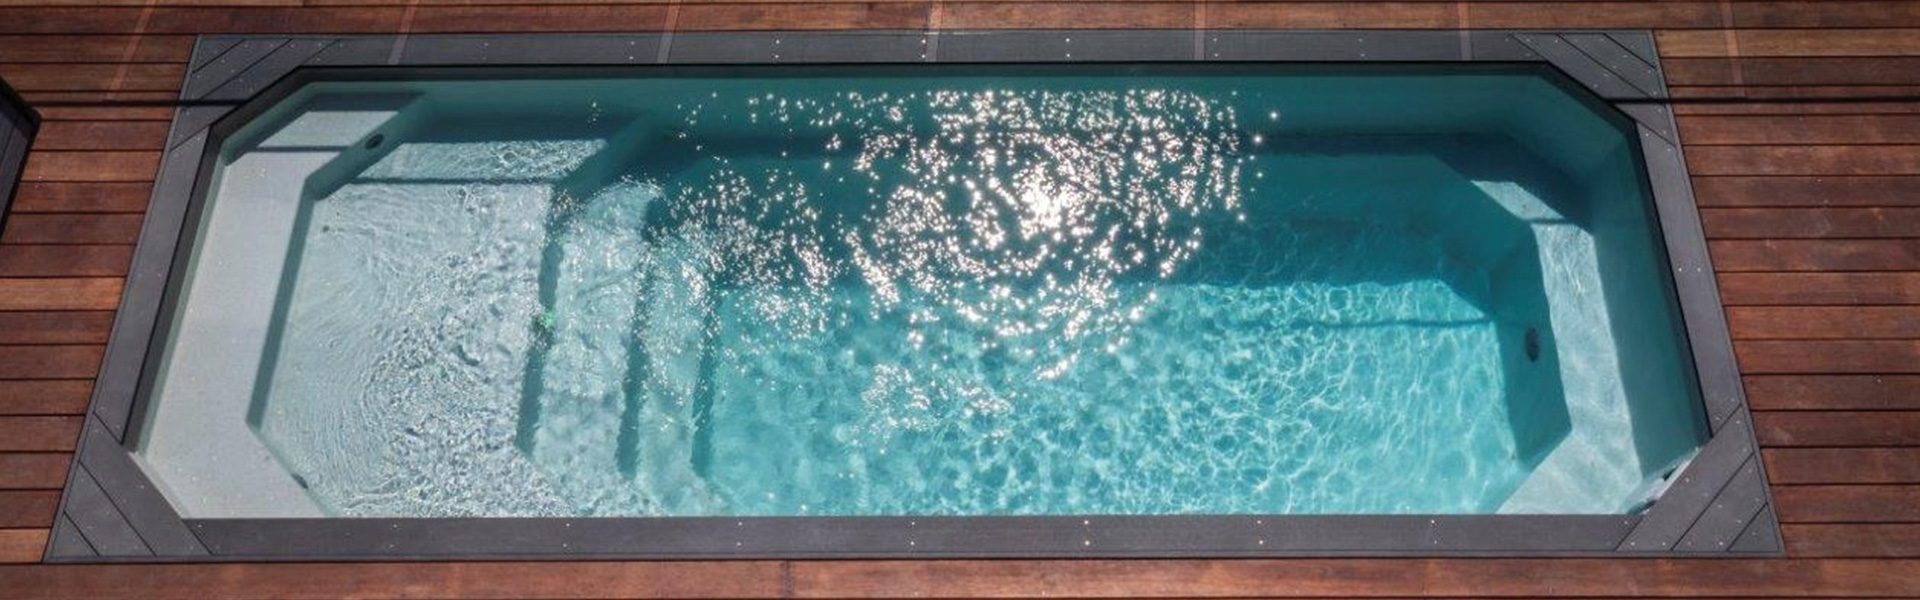 pools-and-spas-blog-banner-express-pools-compass-pools-1